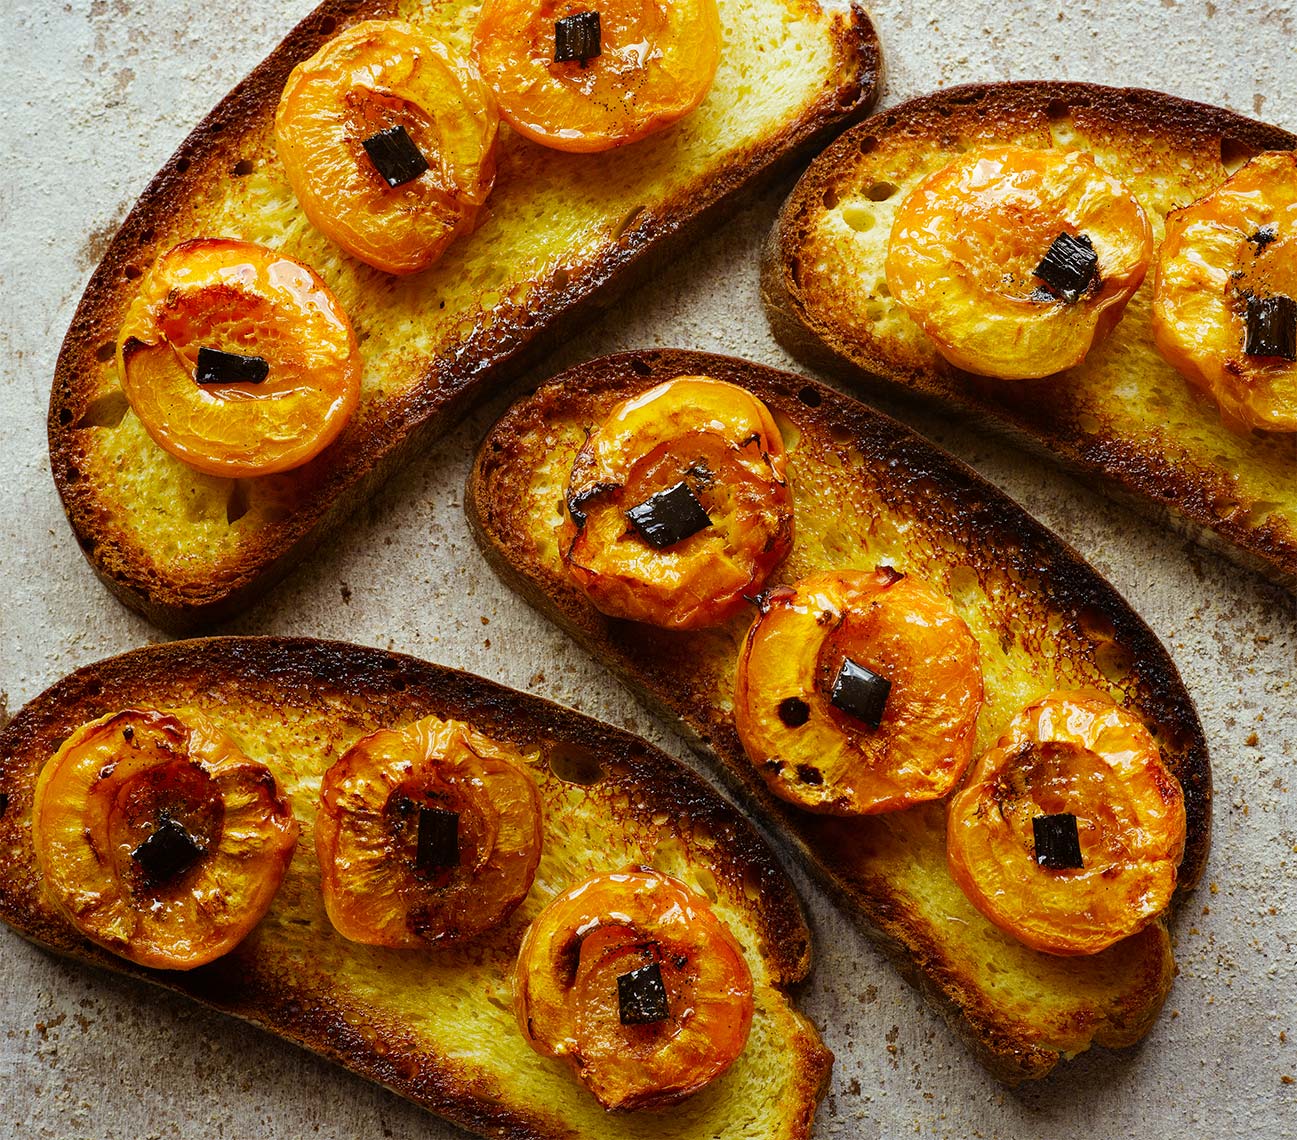 Apricots on toast  | Colin Campbell - Food Photographer